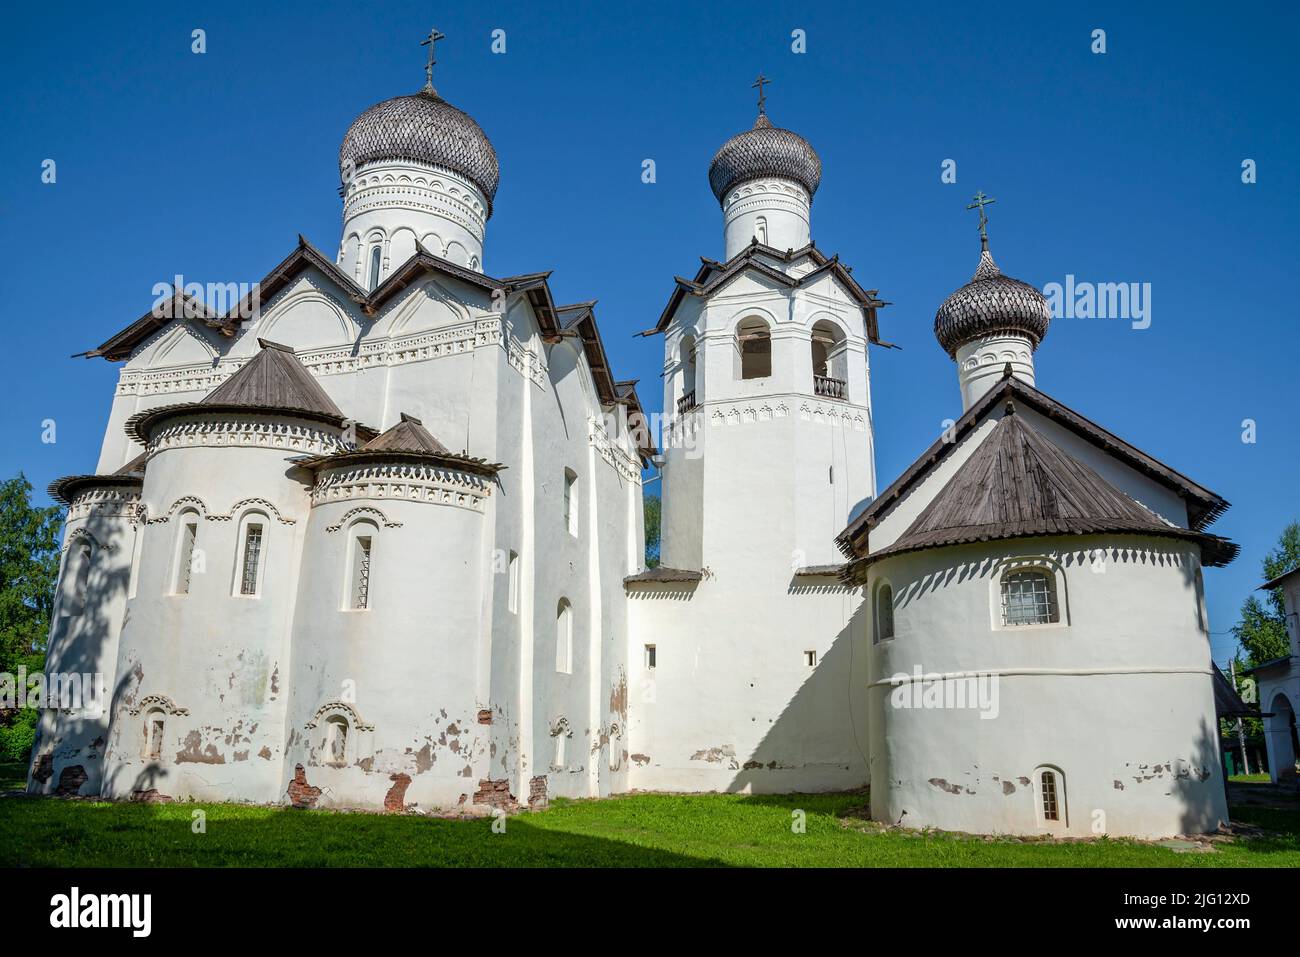 Temples of the ancient Spaso-Preobrazhensky Monastery on a summer day. Staraya Russa, Russia Stock Photo